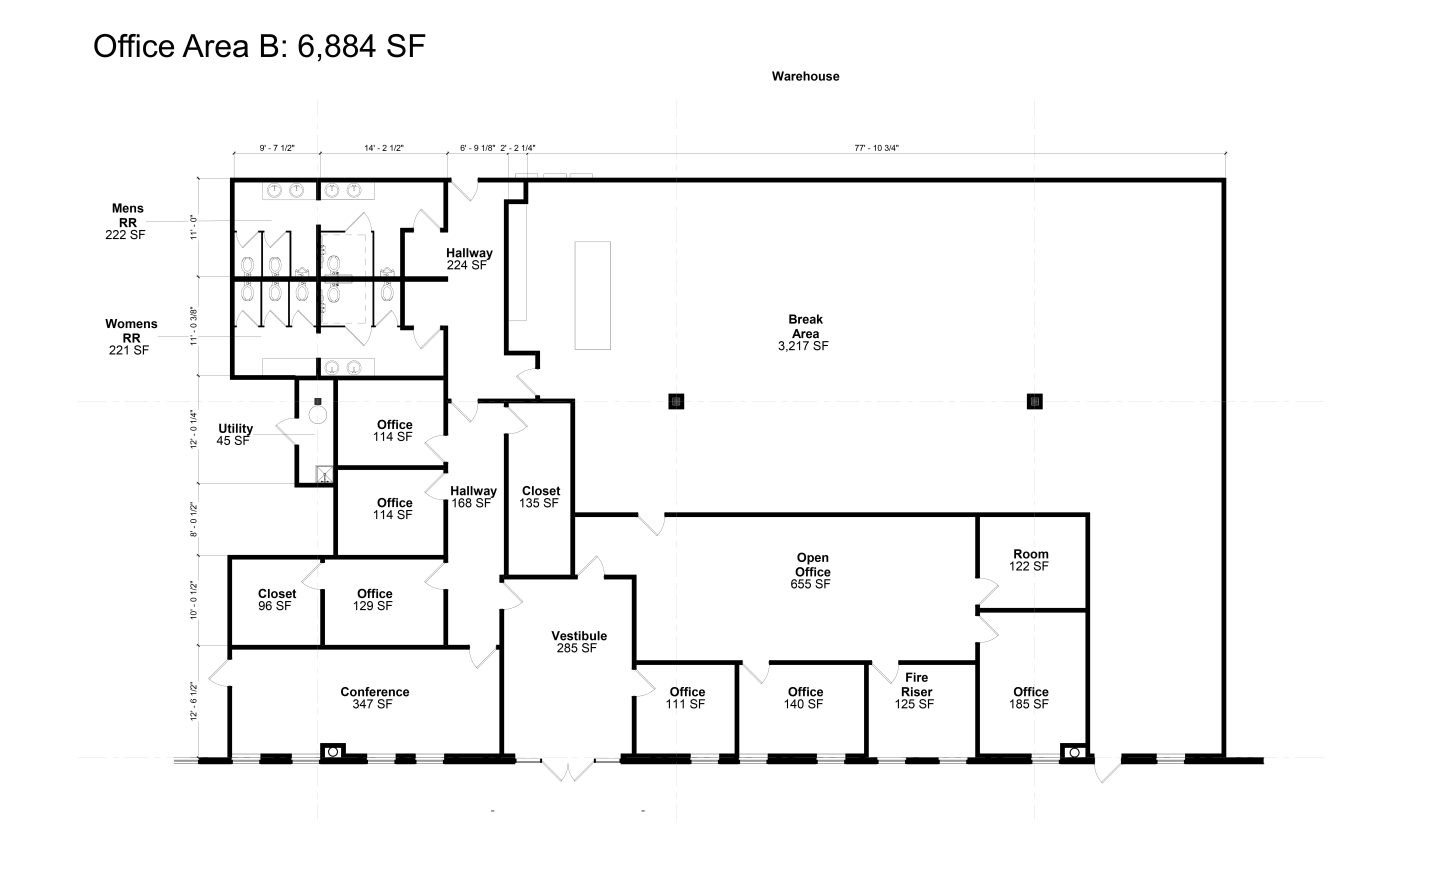 5701 North Meadows Drive - Photos and floorplans